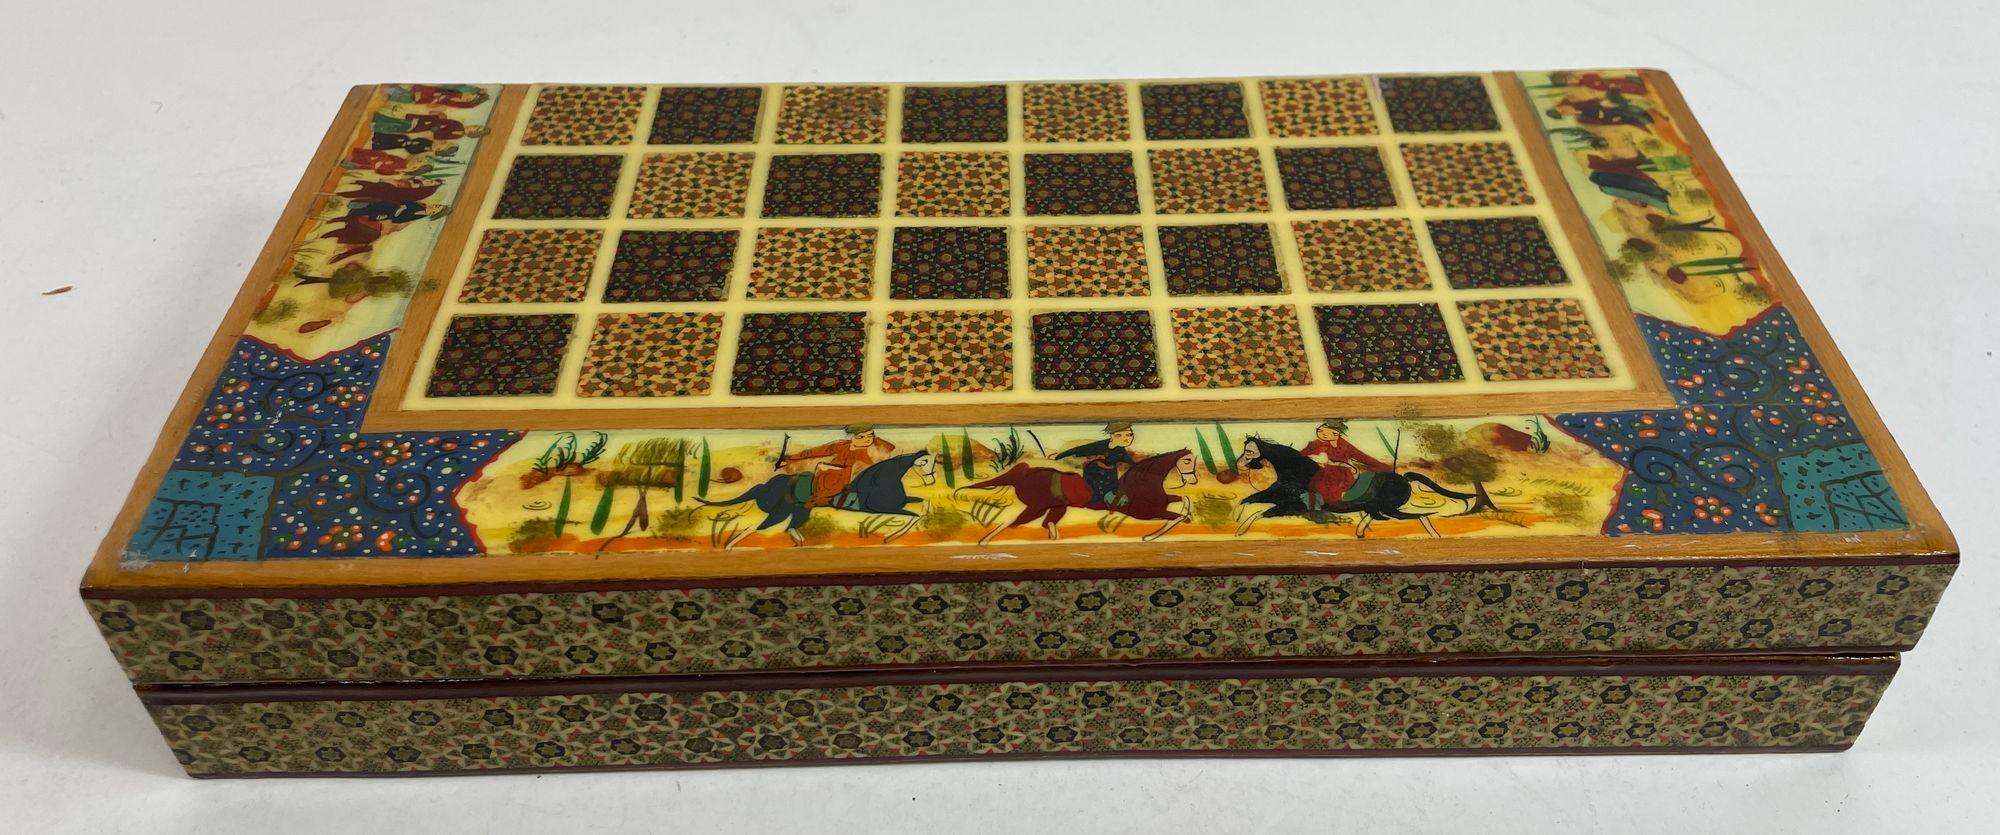 Vintage Persian Micro Mosaic Chess Game Box For Sale 6